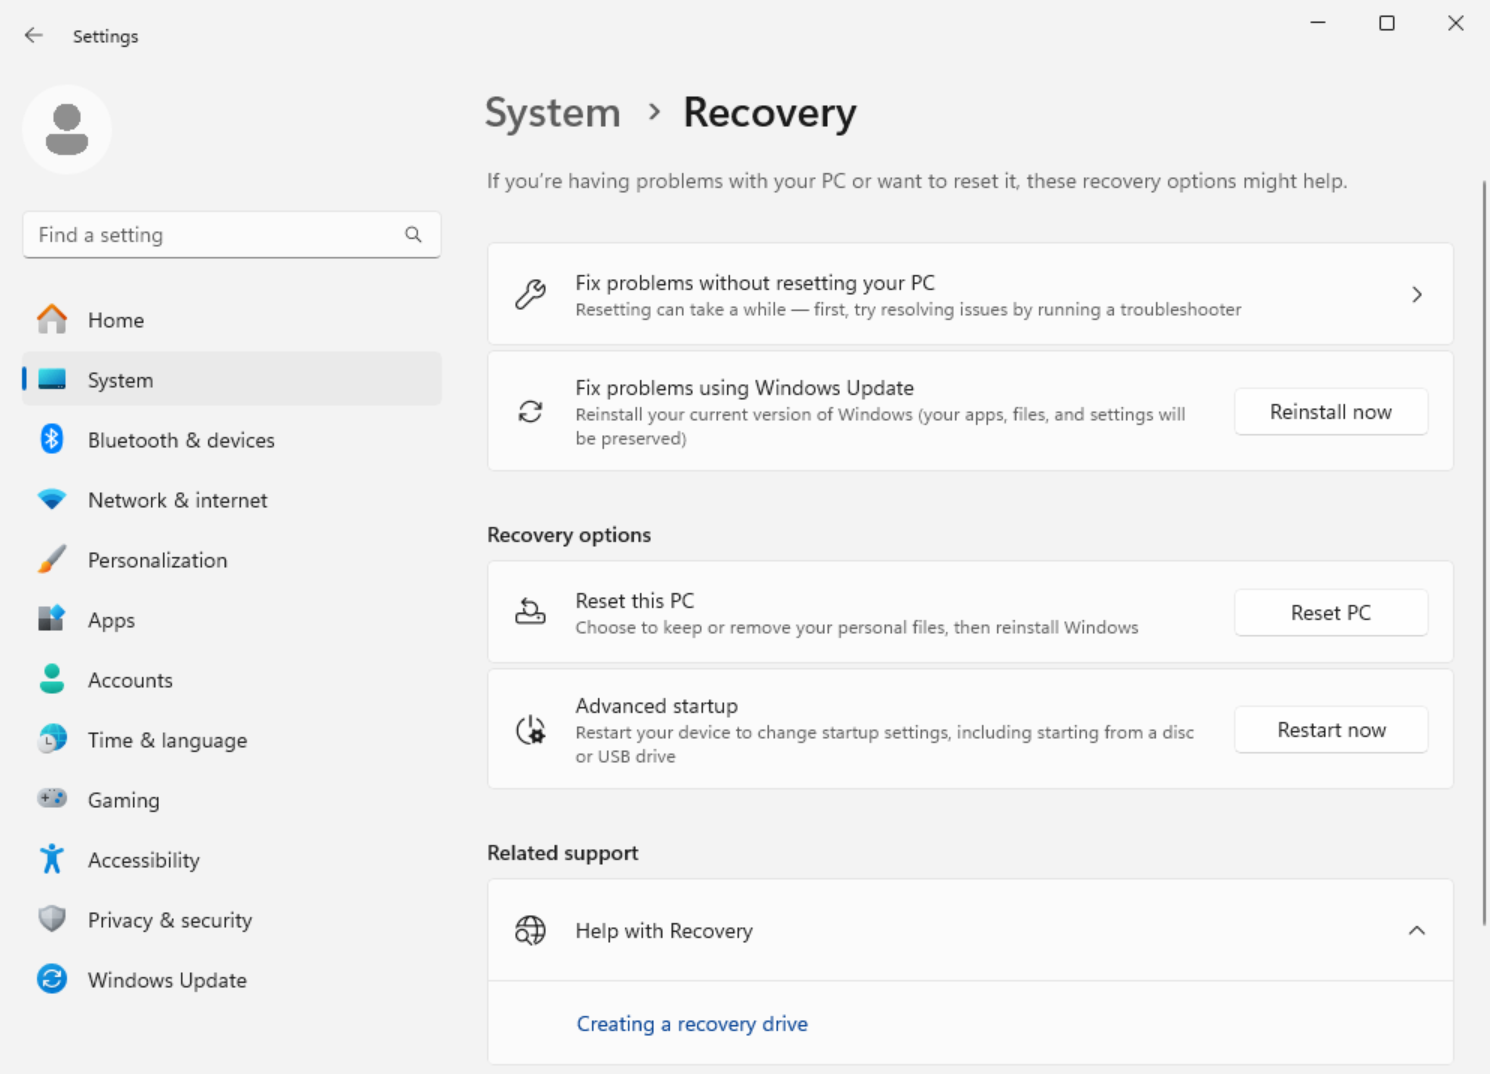 Screenshot of Windows Settings showing the Fix problems with Windows Update option in the System > Recovery page.